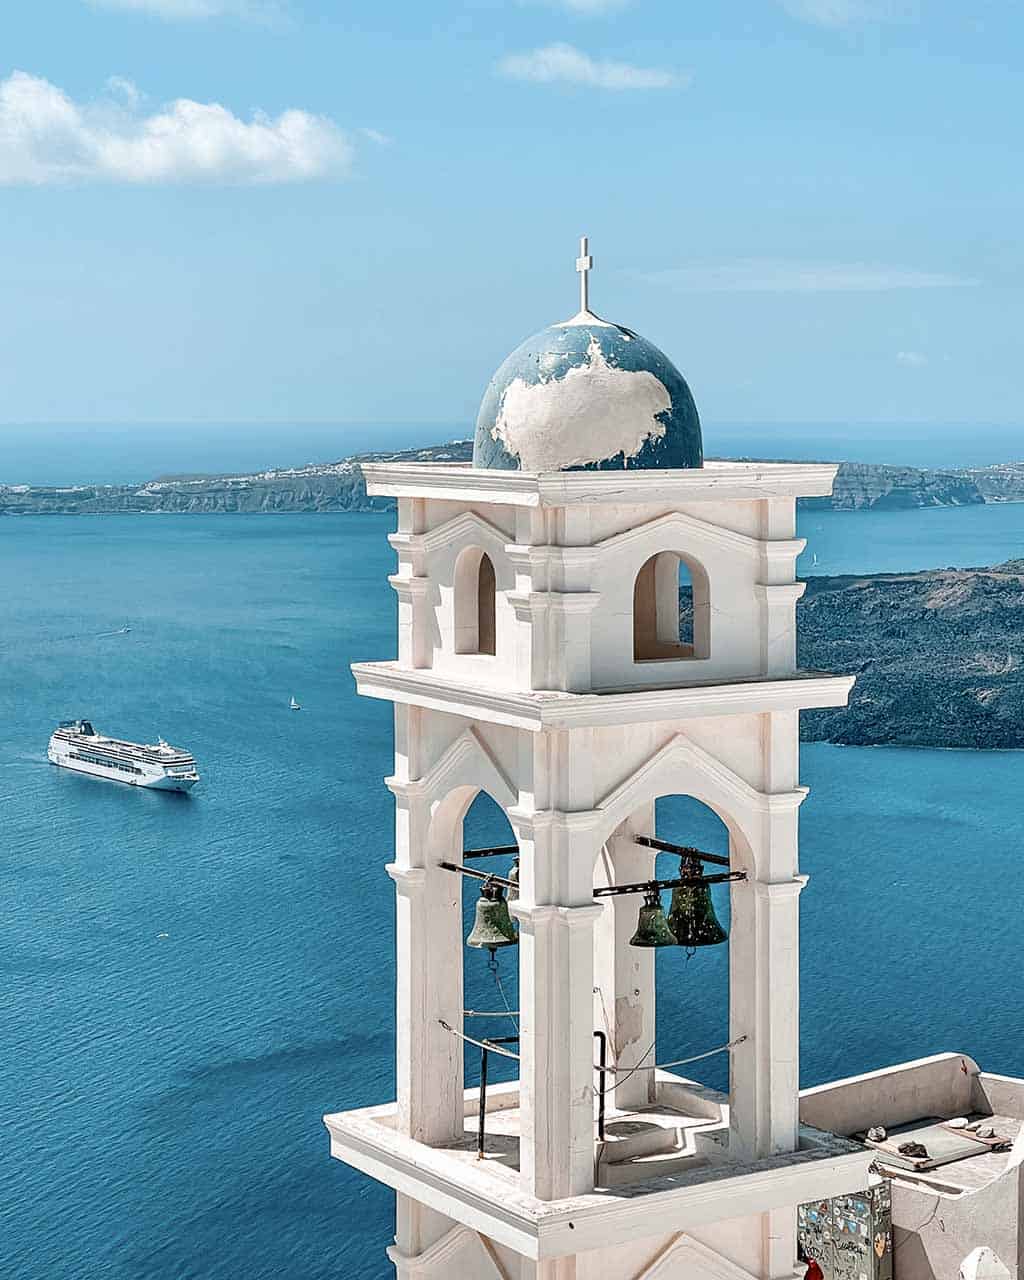 A white bell tower with a blue dome overlooking the Aegean Sea, with a boat and a few islets in the background.